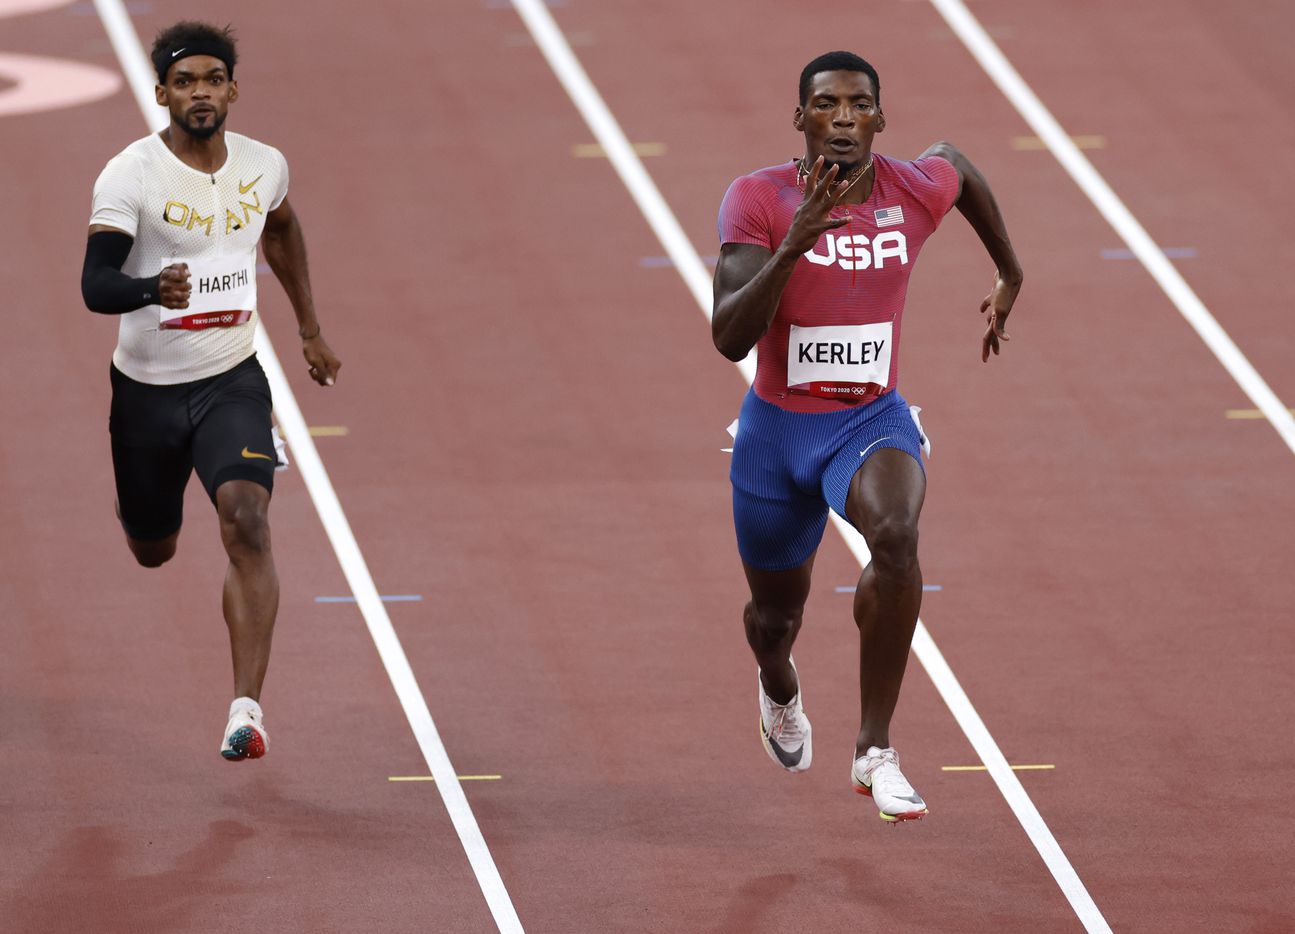 USA’s Fred Kerley (right) and Barakat Al Harthi (left) race to the finish in heat 5 of 7...